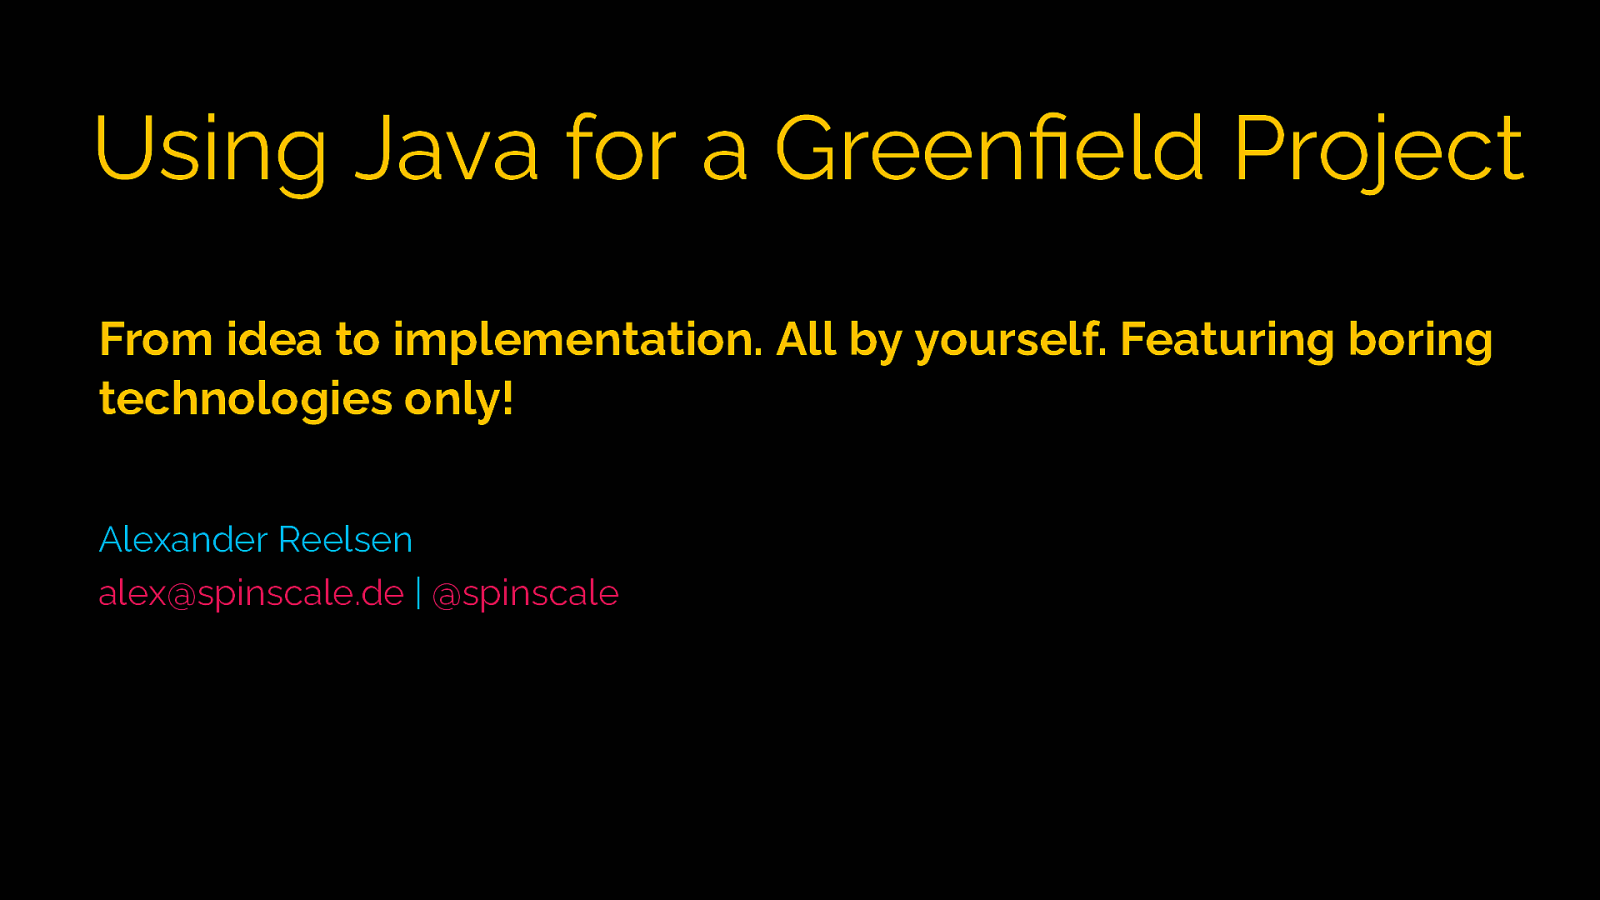 Up and running with a Java based greenfield side project